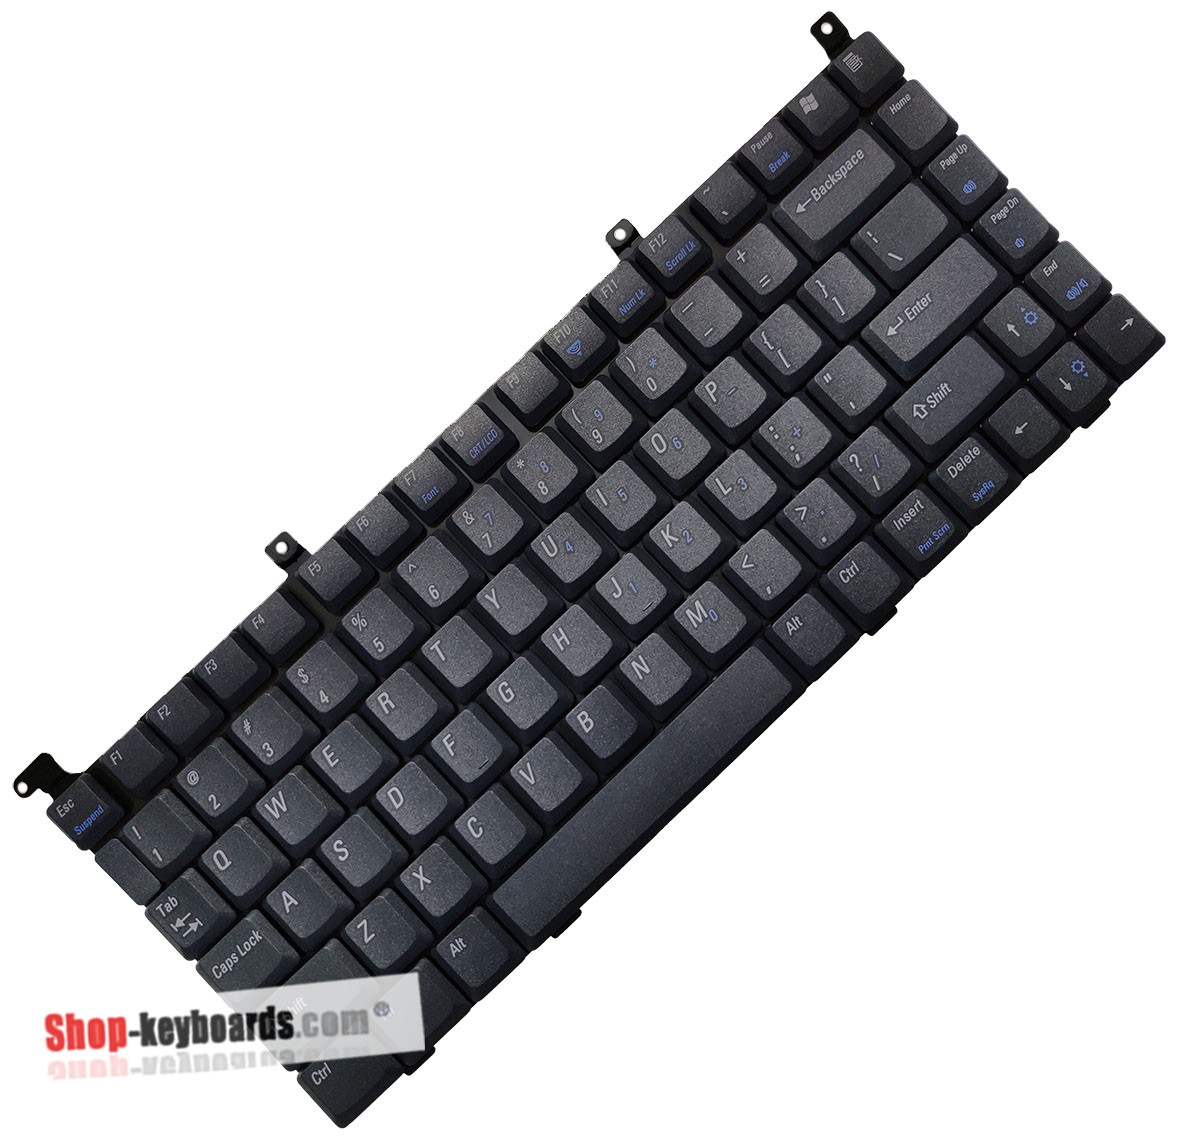 Dell Inspiron 1150 Keyboard replacement